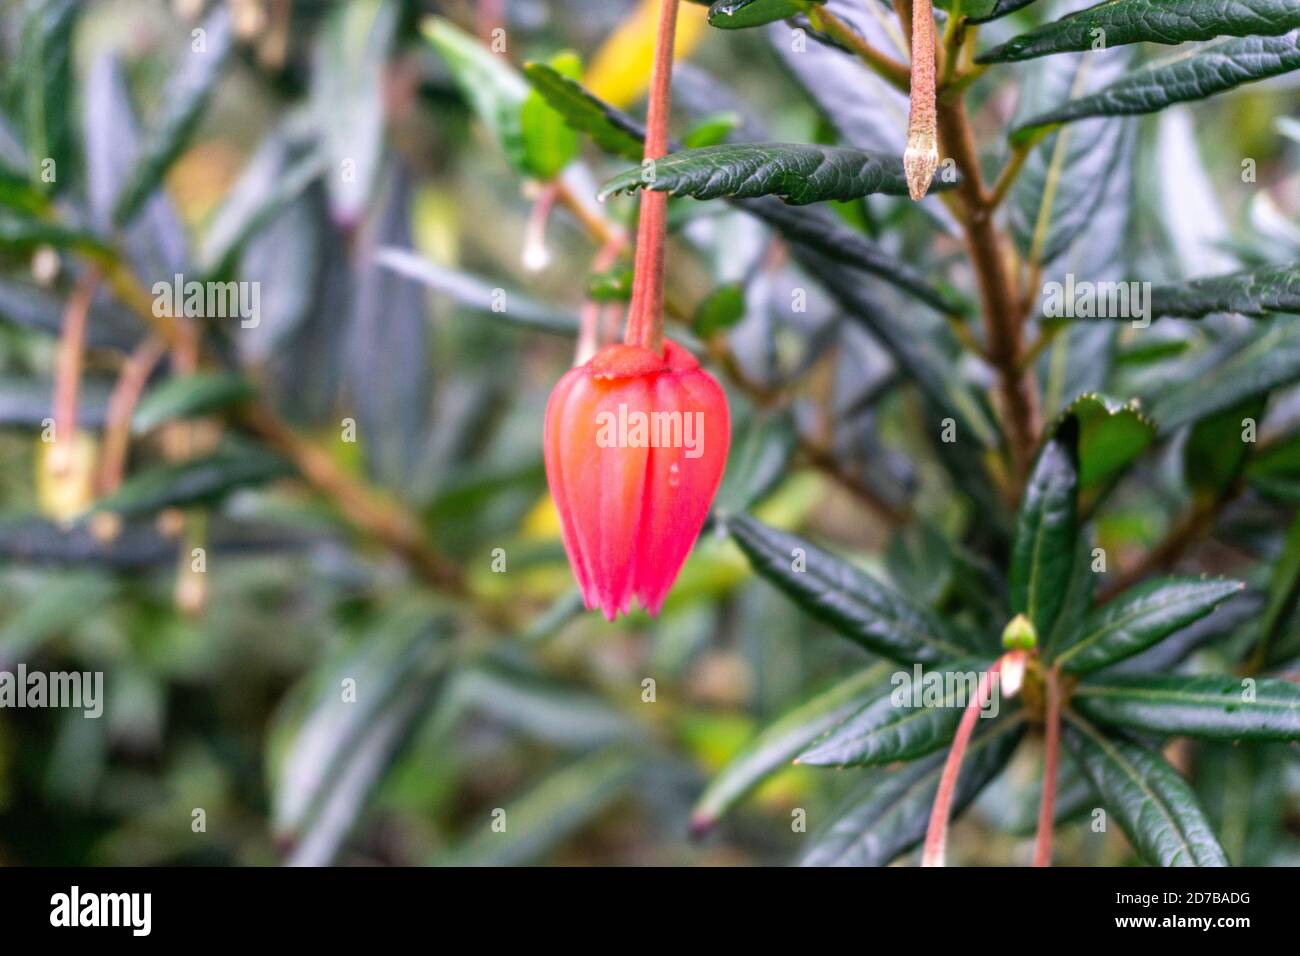 The flower of crinodendron  hookerianum, also known as Chilean lantern. Stock Photo